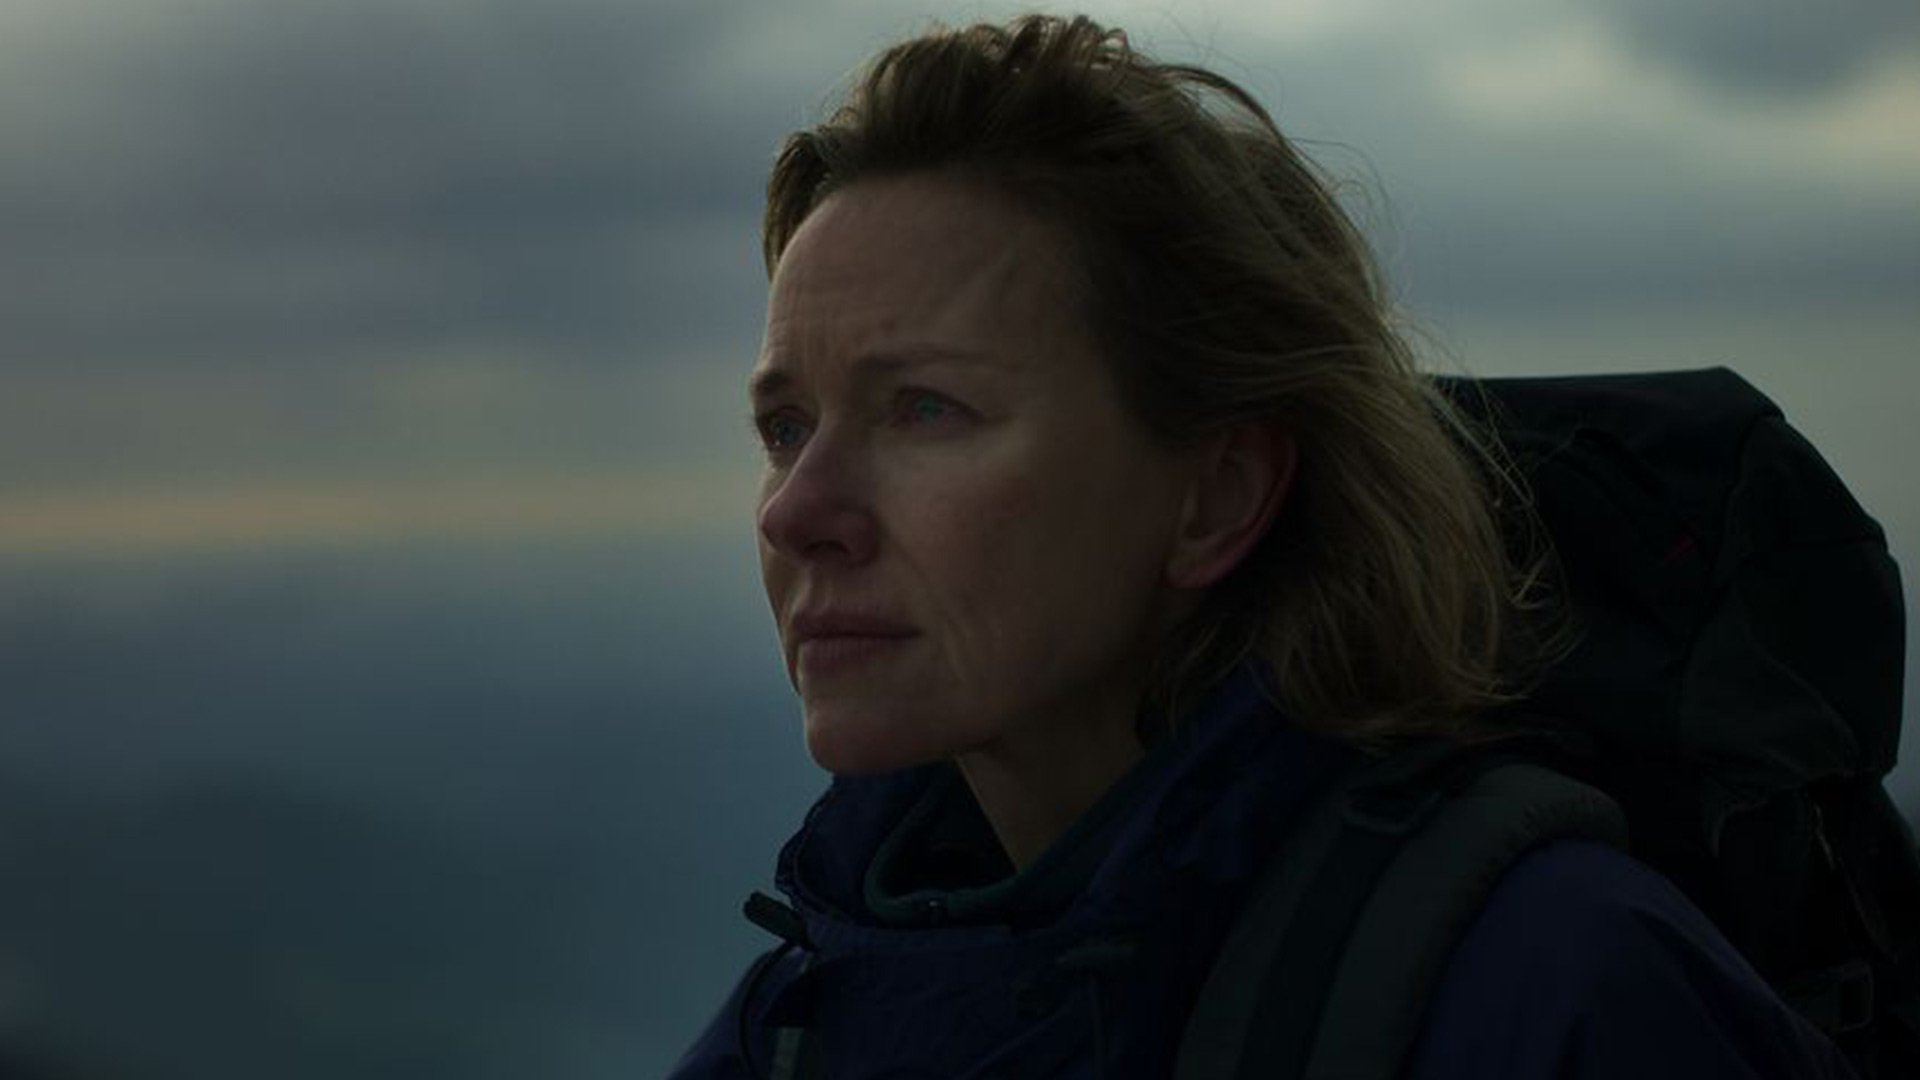 Pam in the mountains in the movie Infinite Storm